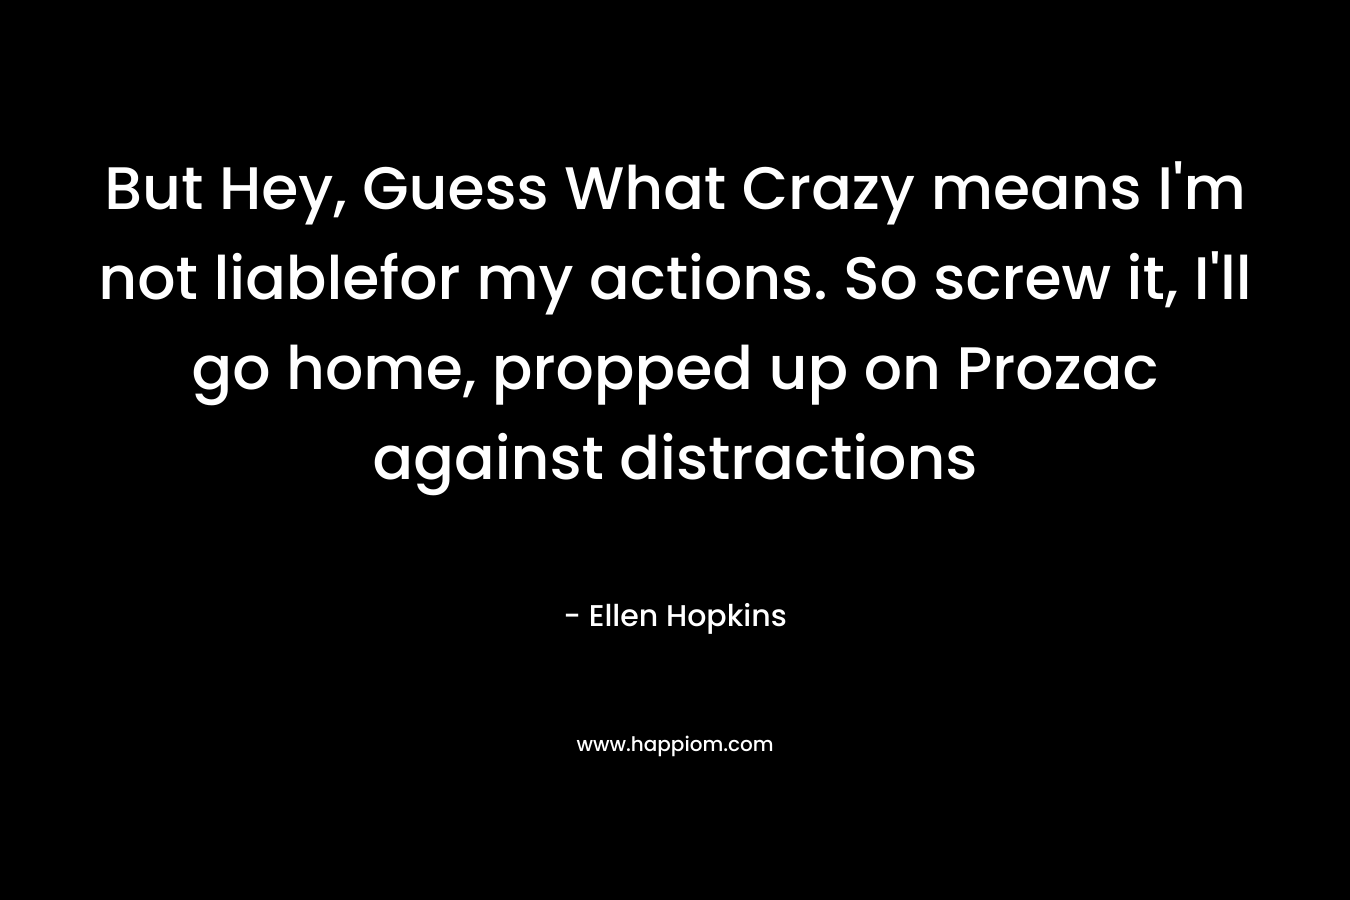 But Hey, Guess What Crazy means I'm not liablefor my actions. So screw it, I'll go home, propped up on Prozac against distractions